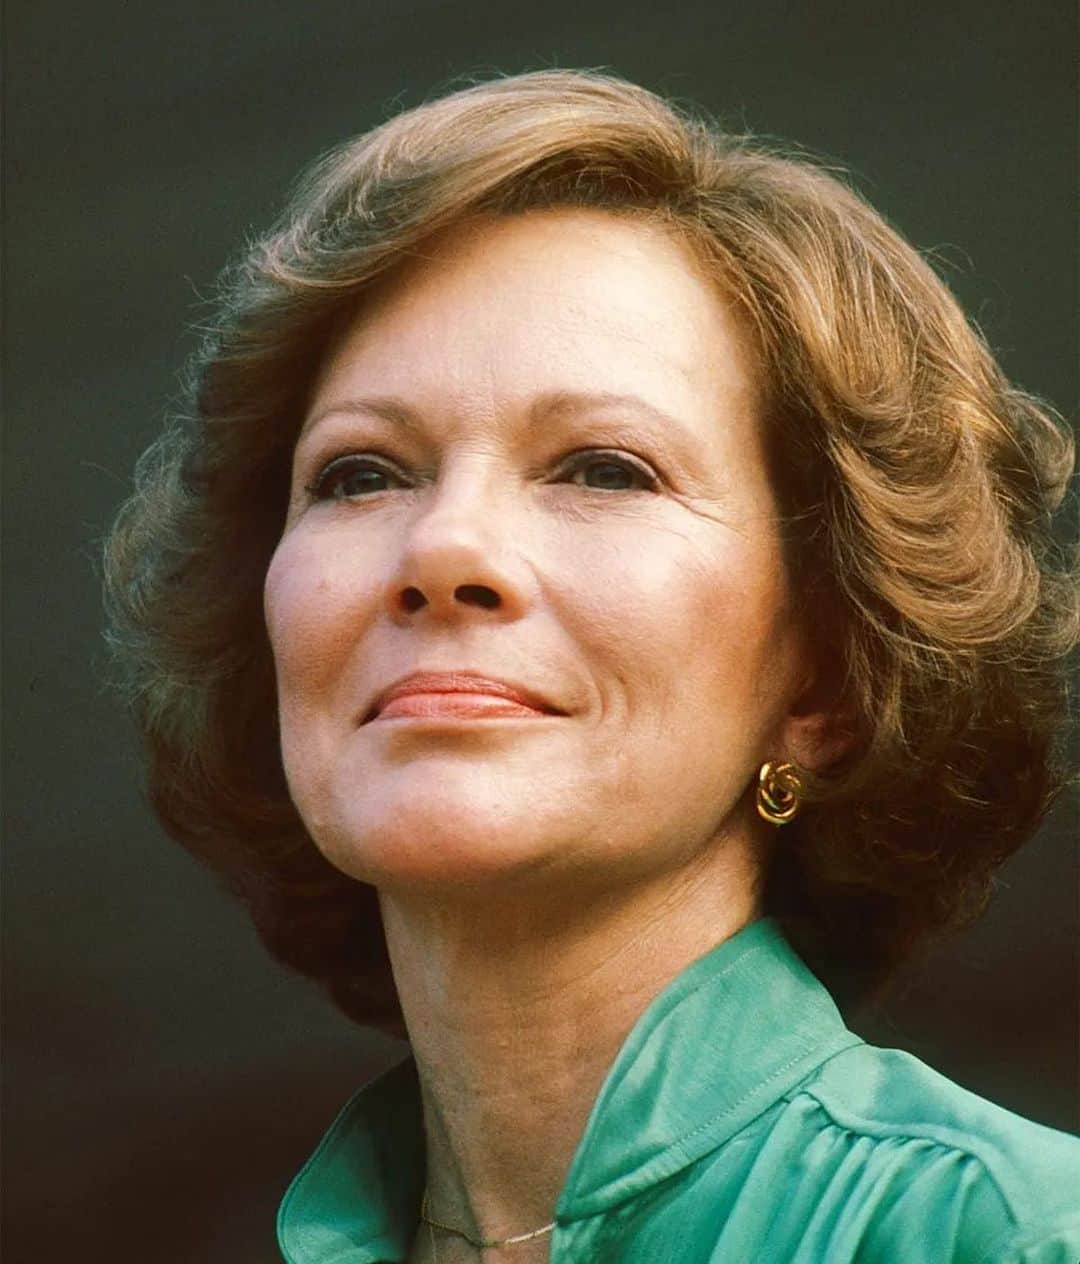 Vanity Fairのインスタグラム：「First Lady Rosalynn Carter, wife of former US President Jimmy Carter, has died. She was 96. The ERA advocate created the model for how a spouse could assume the role of presidential partner. Read our full tribute at the link in bio.  Photo: Diana Walker/@gettyimages」